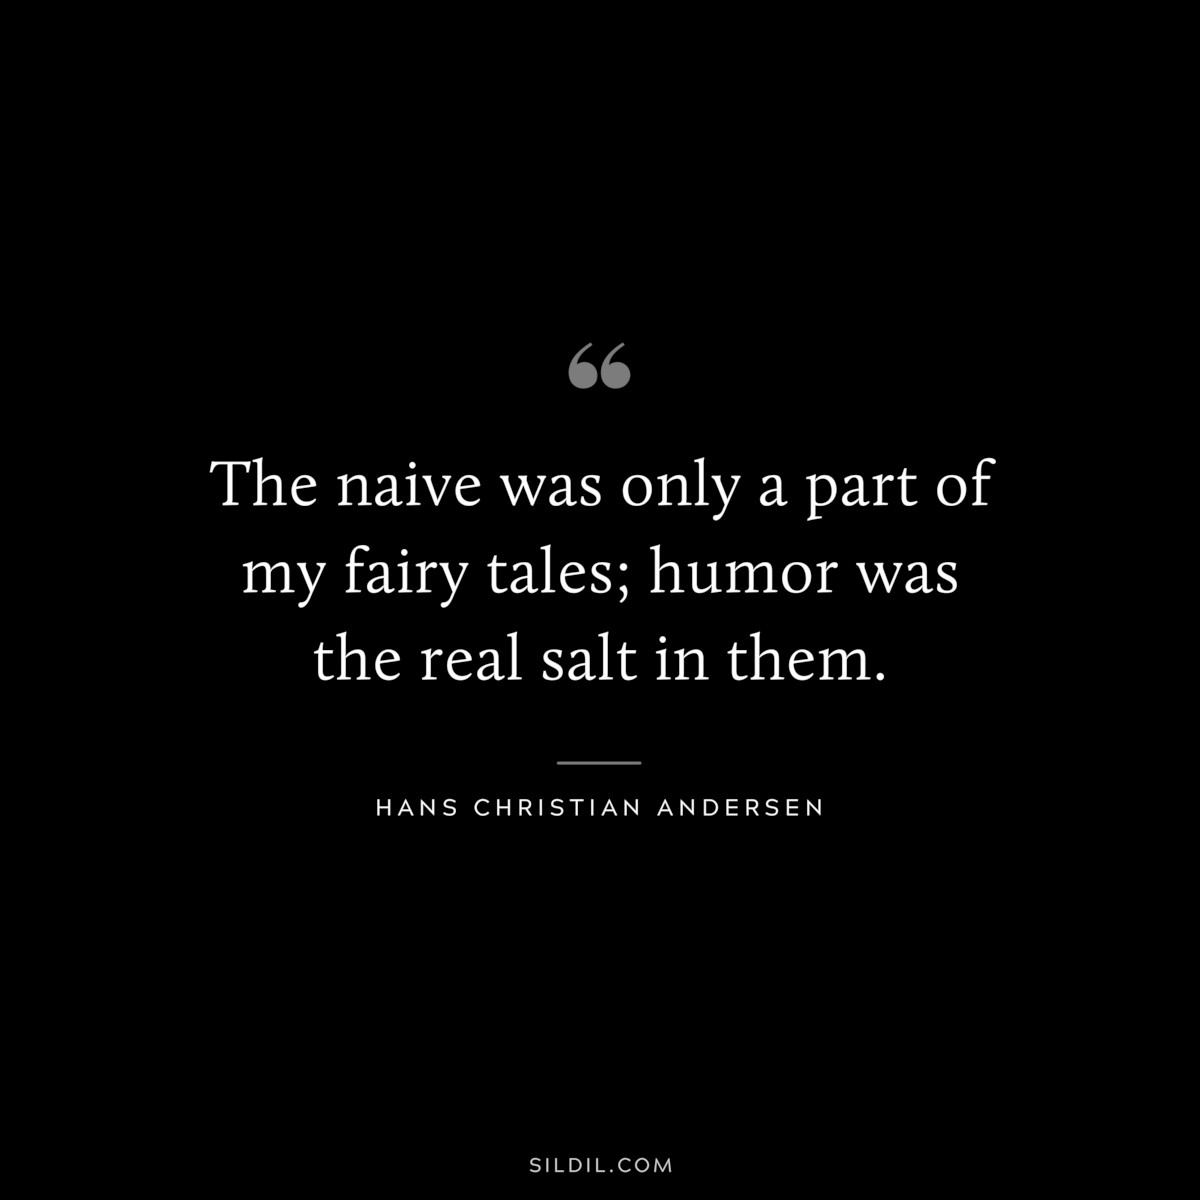 The naive was only a part of my fairy tales; humor was the real salt in them. ― Hans Christian Andersen